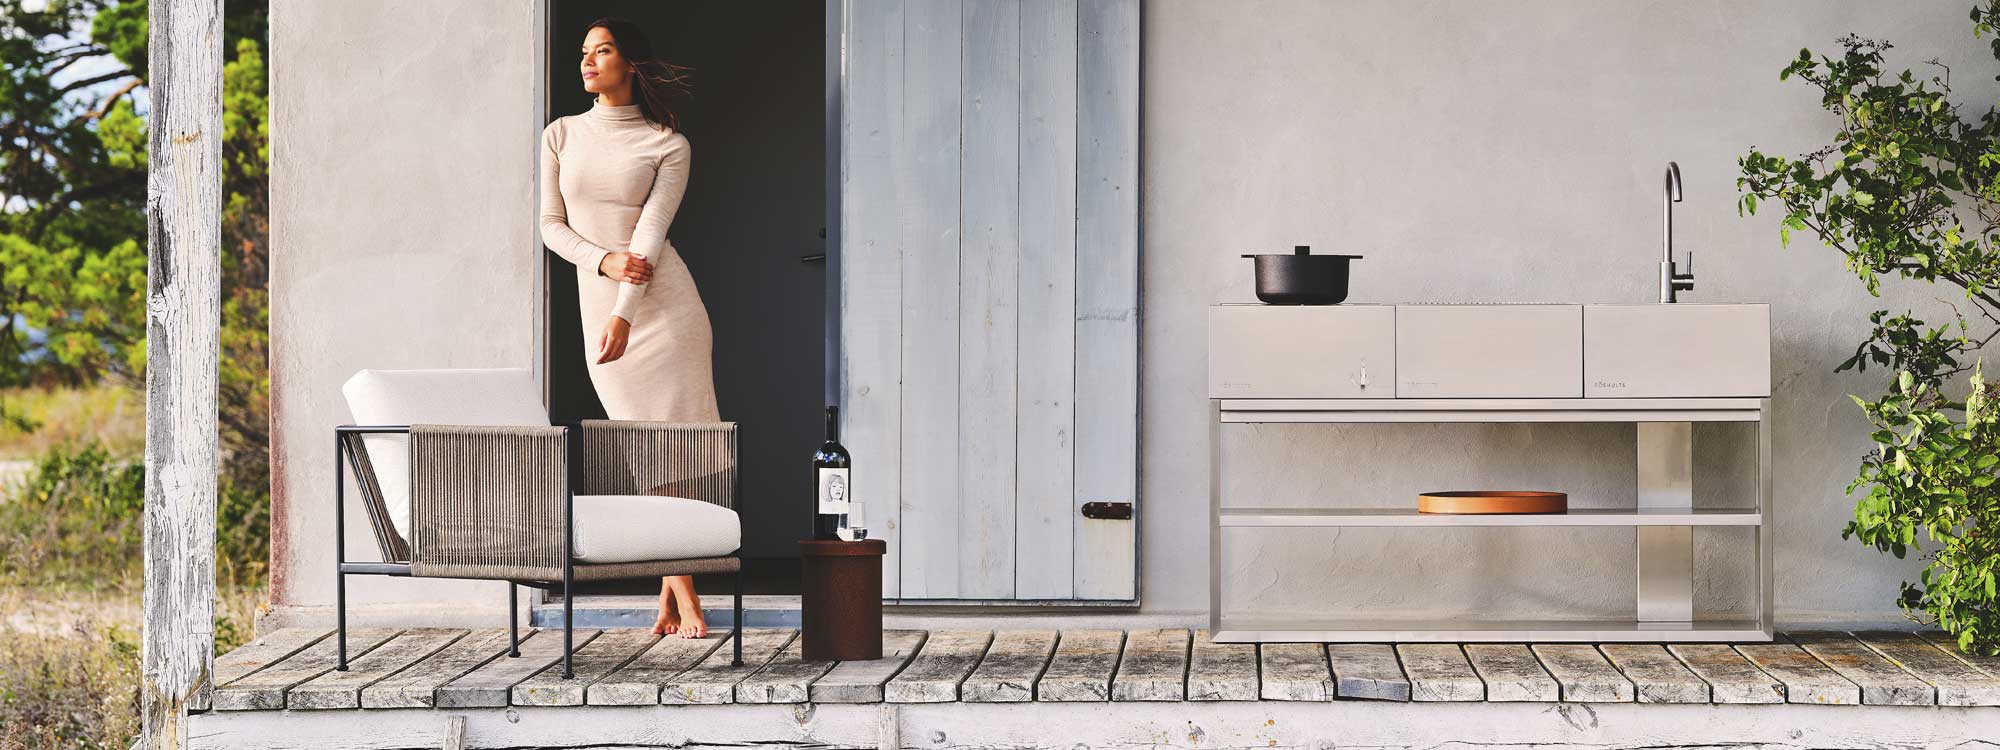 Image of woman leaning against doorway next to Antibes modern garden chair and Open Kitchen stainless steel BBQ